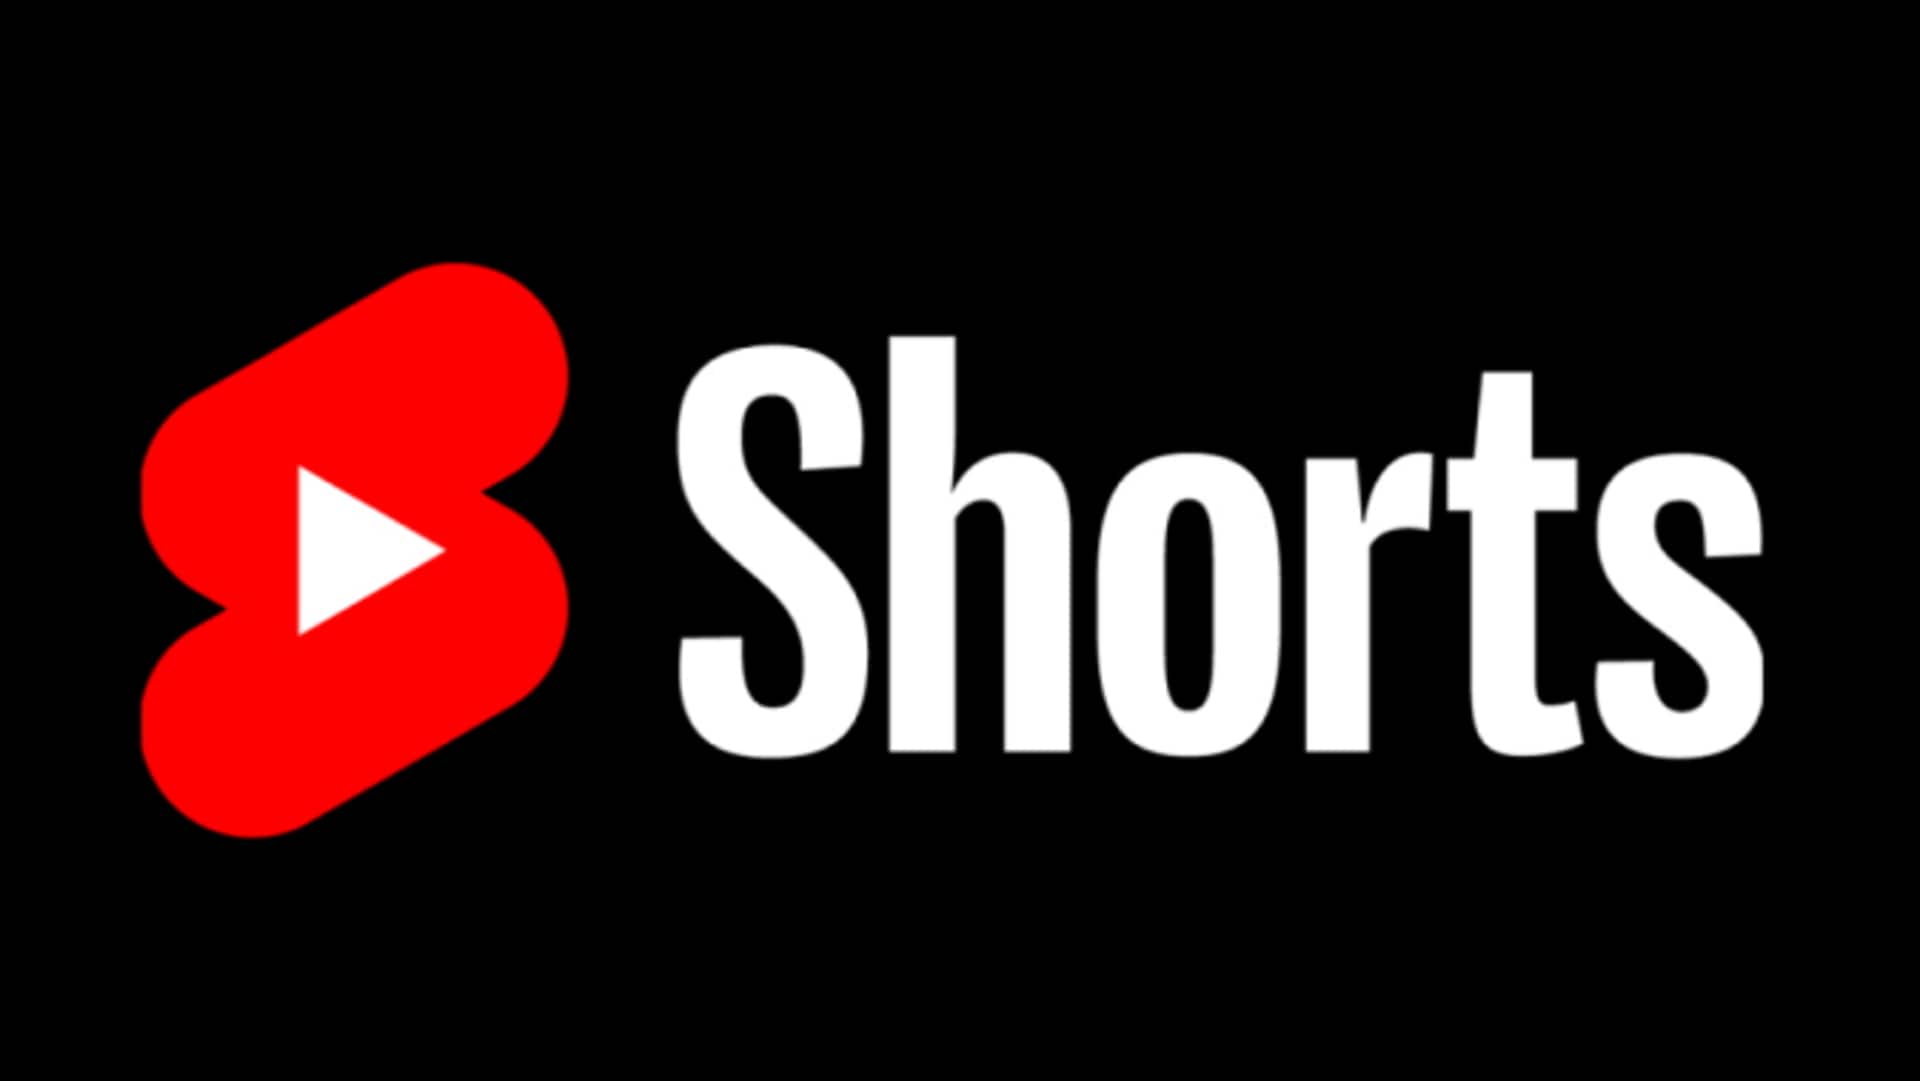 YouTube Shorts will now let you shop while watching videos